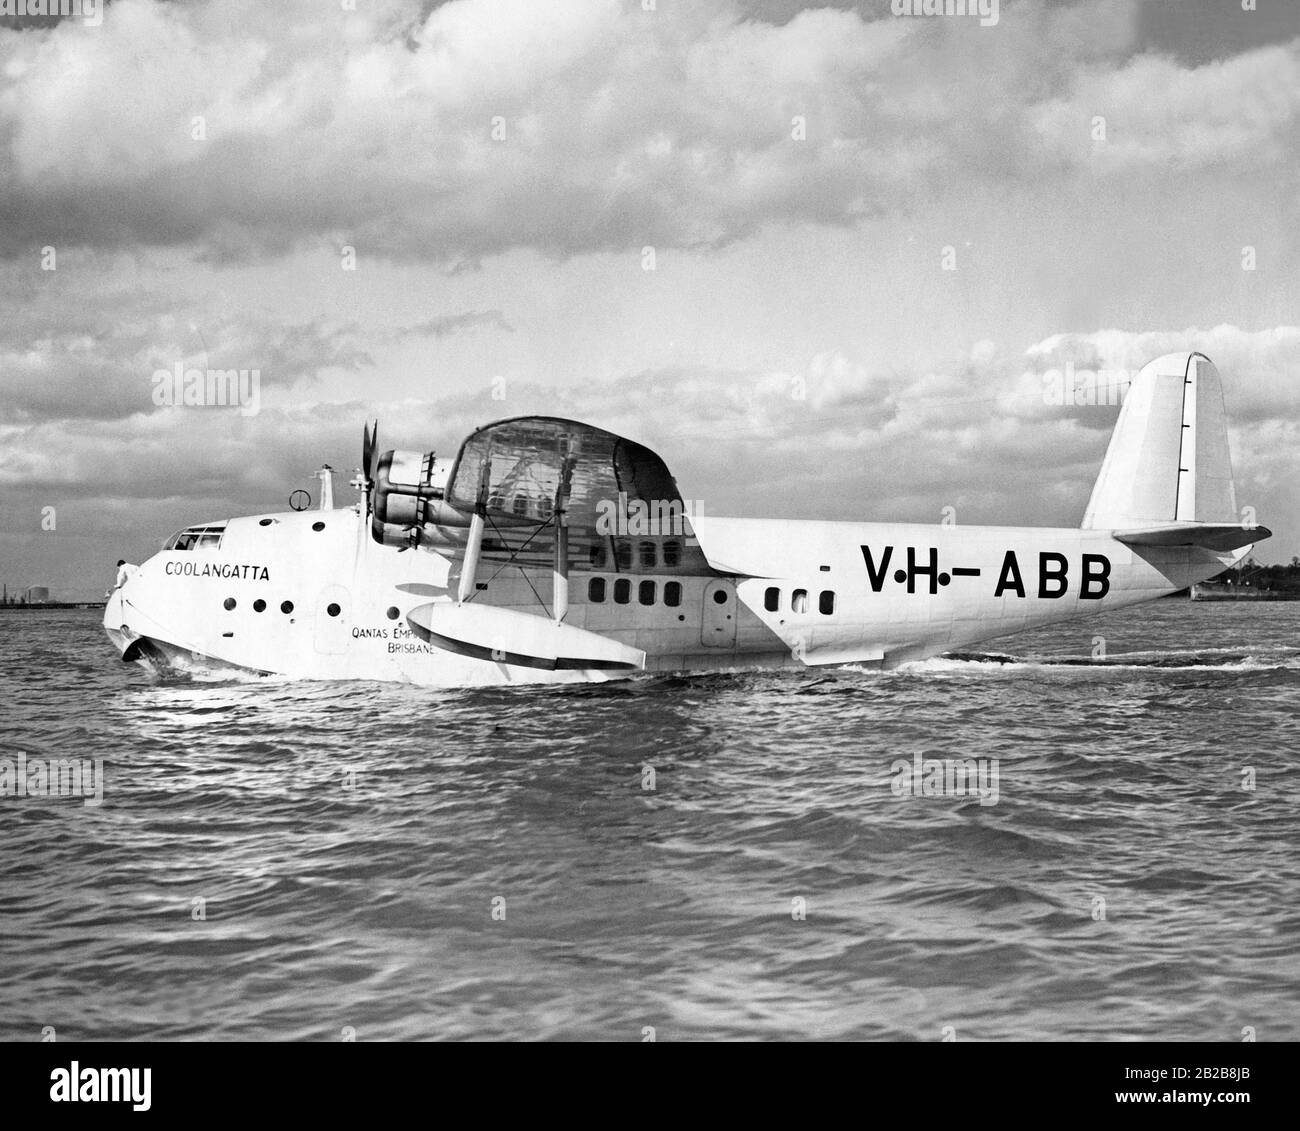 A flying boat of the type Short Empire (registration number VH-ABB, given name 'Coolangatta') before its delivery to the Australian airline Quantas. Stock Photo